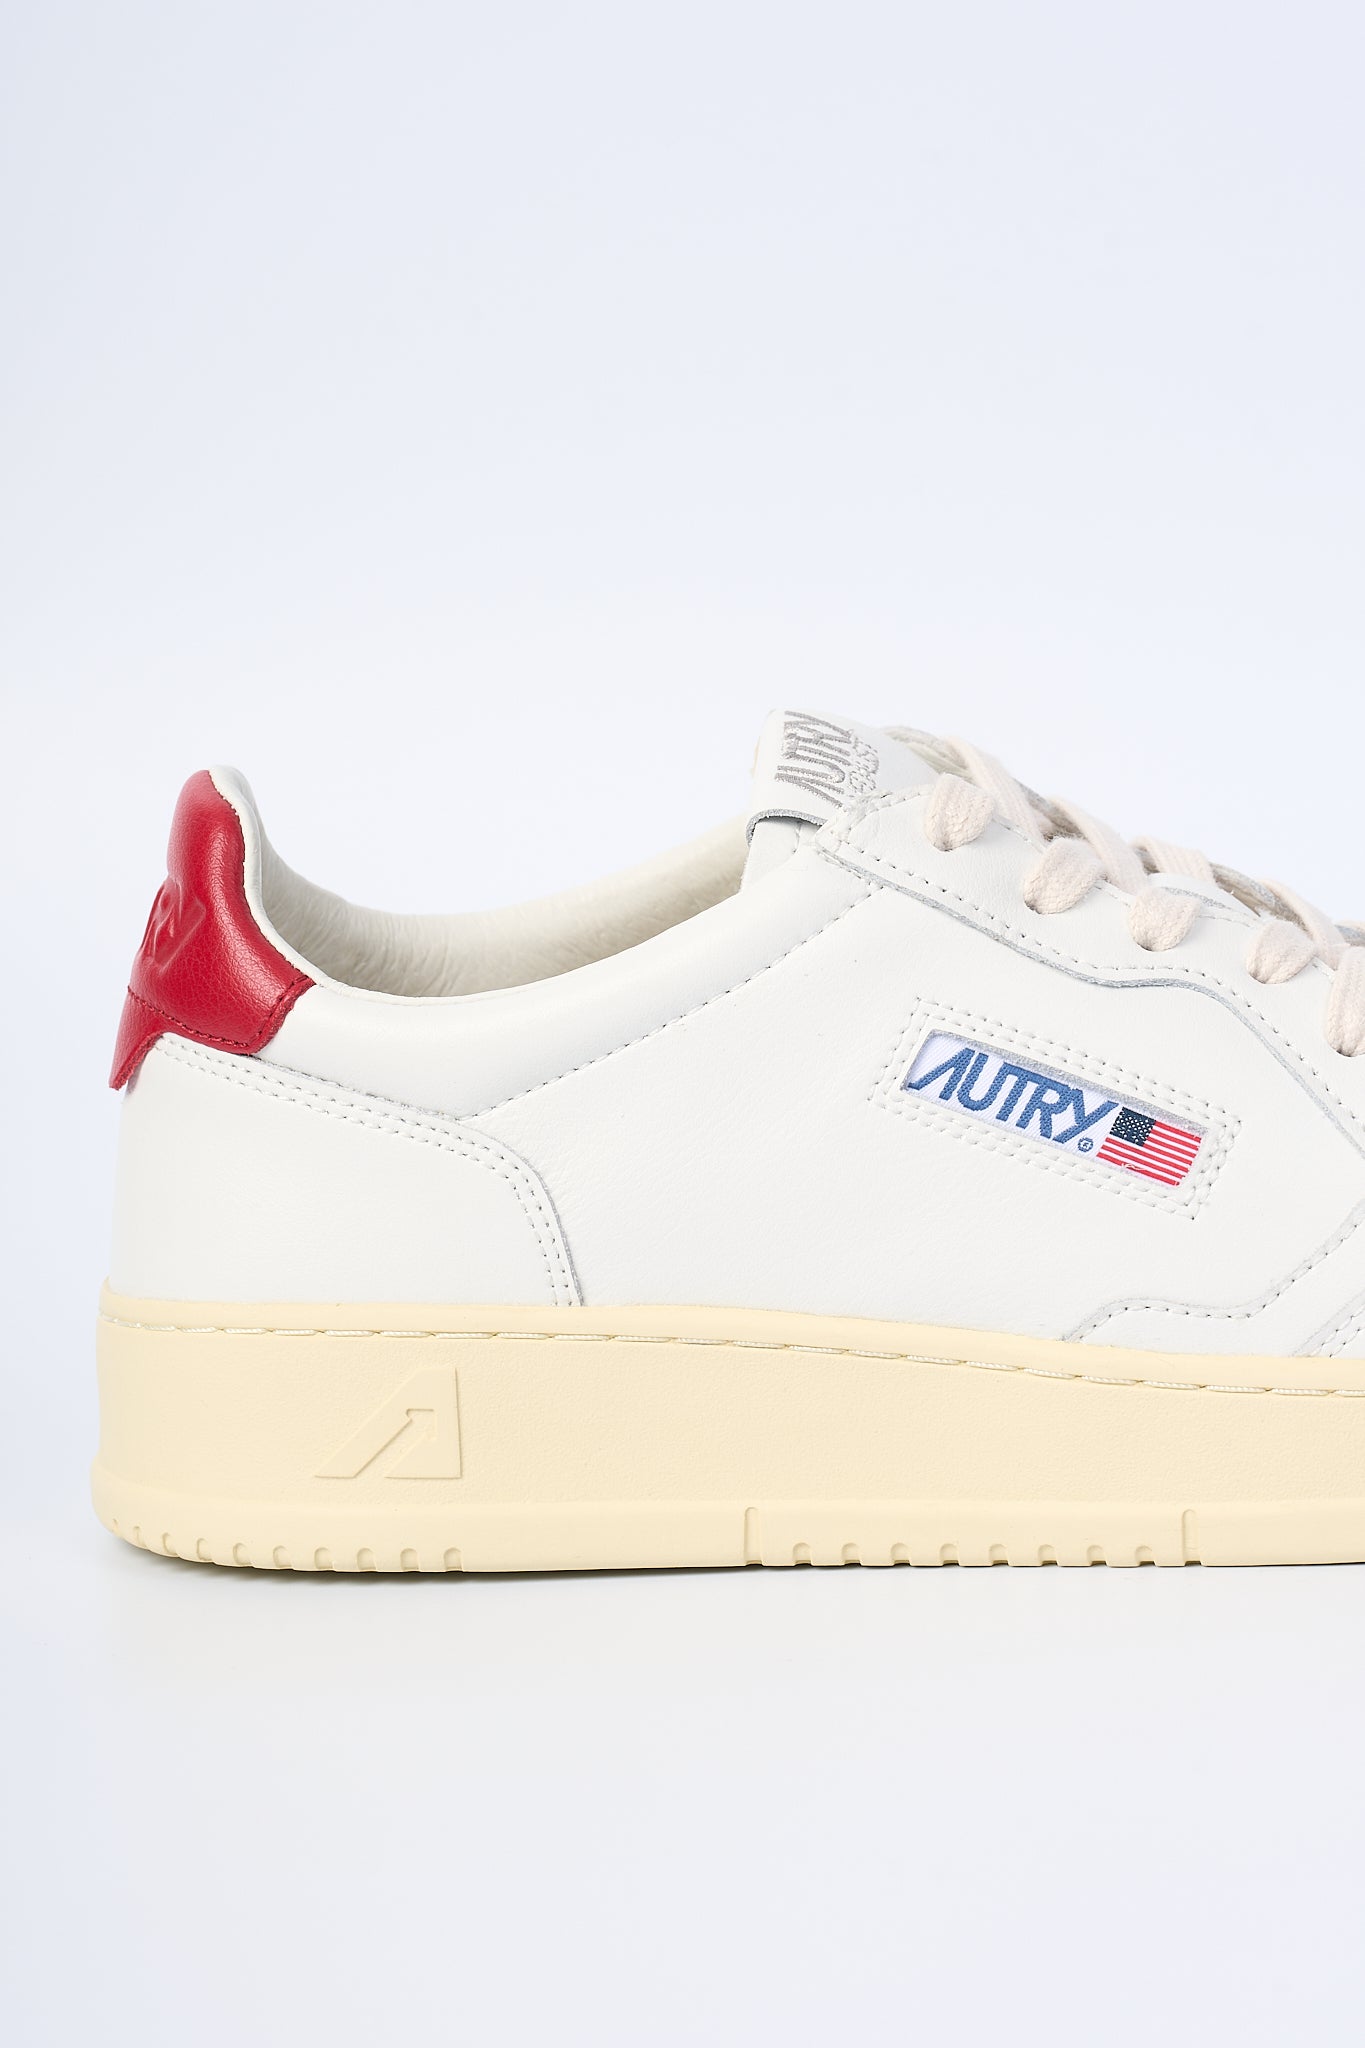 Autry Sneaker Medalist AULM-LL21 Bianco/rosso Uomo-4